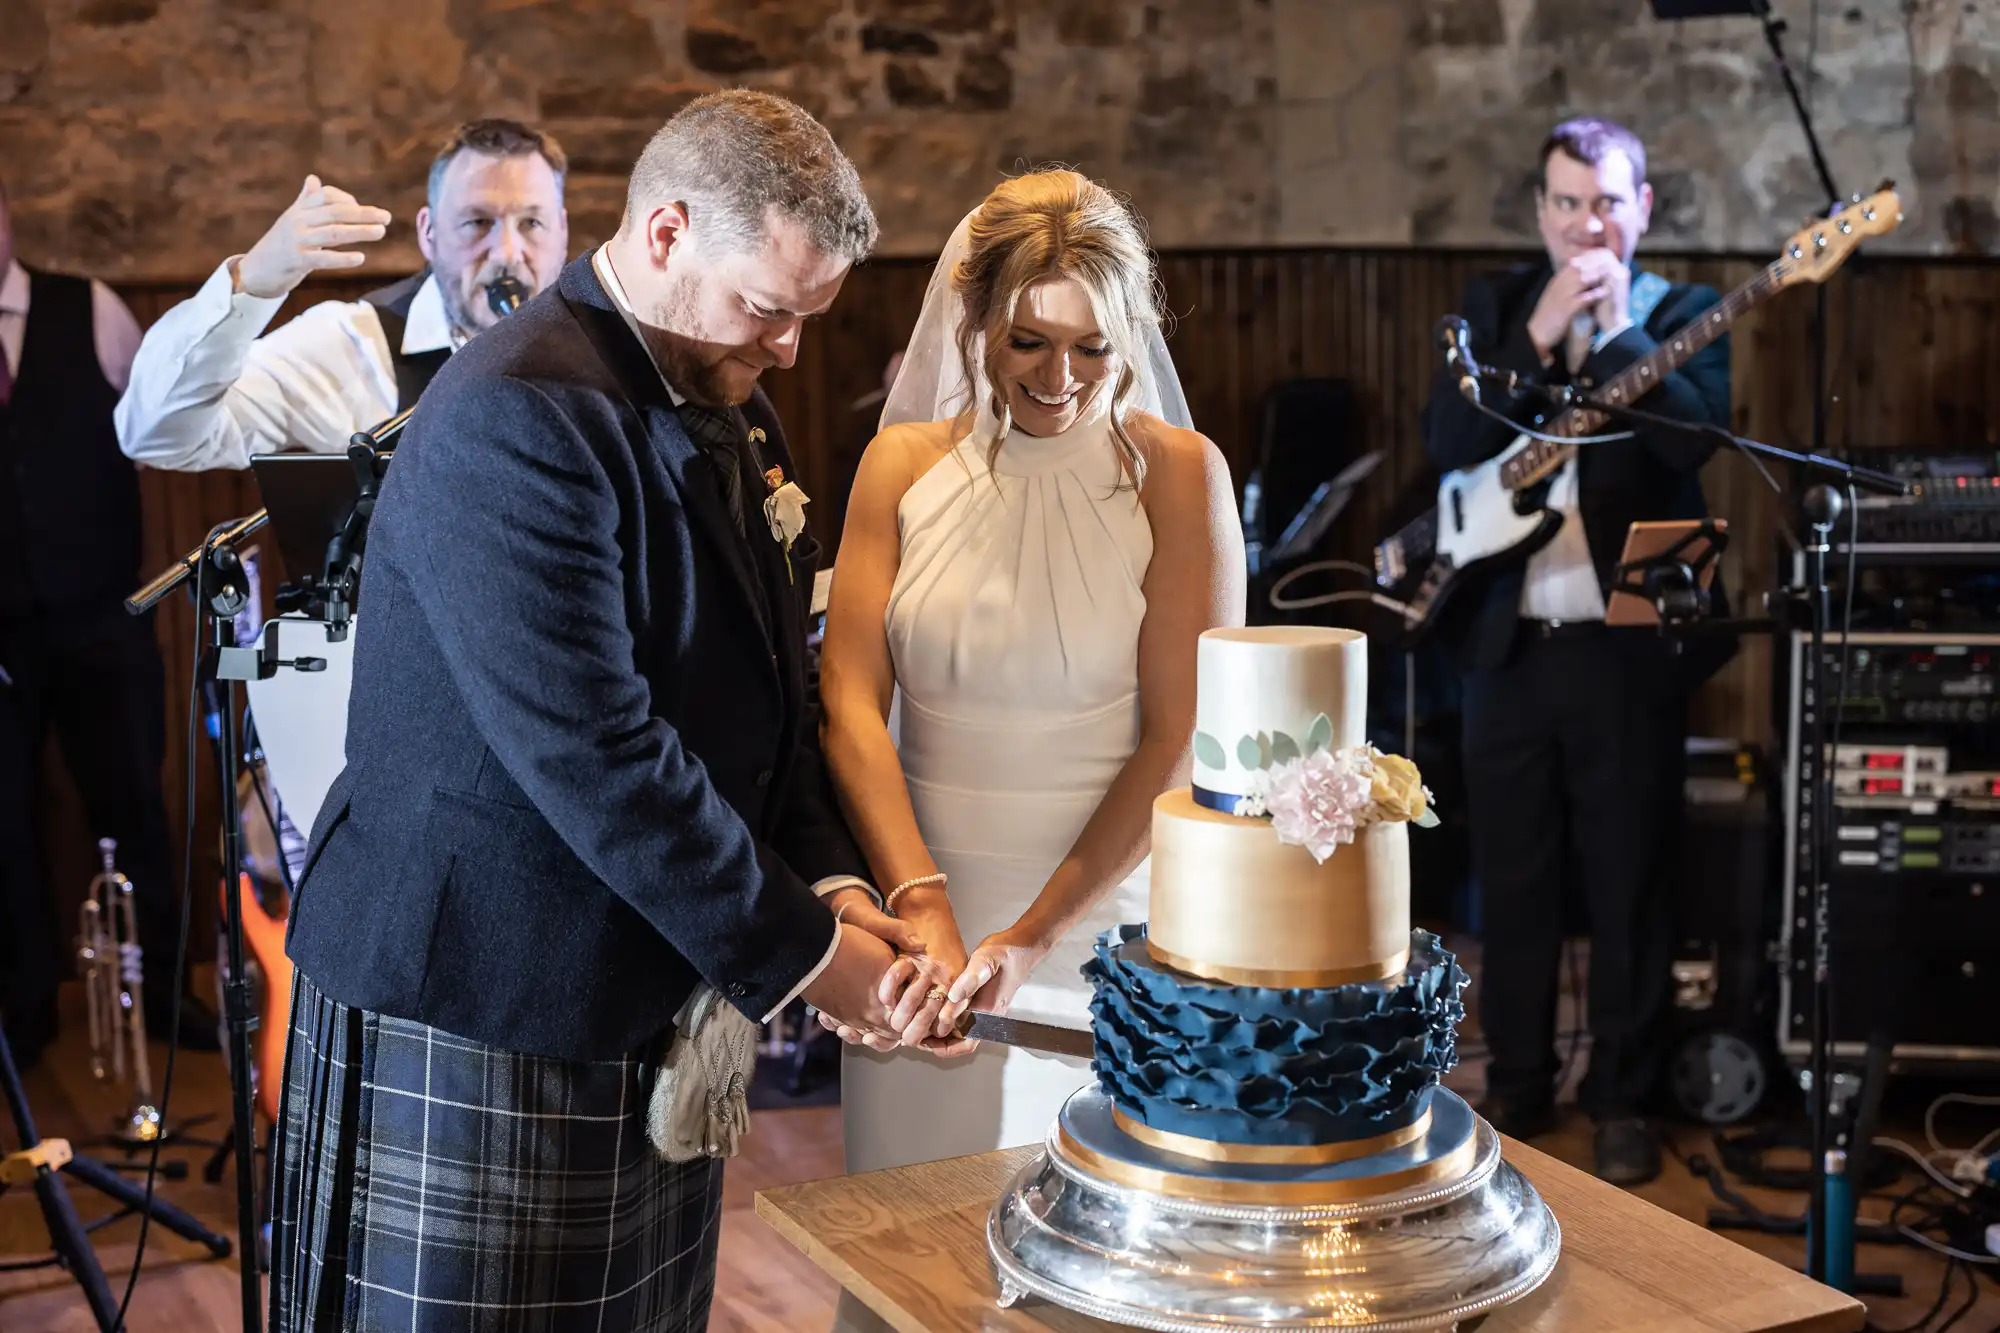 A bride and groom in a kilts cutting a tiered wedding cake, with a band playing in the background at a festive venue.